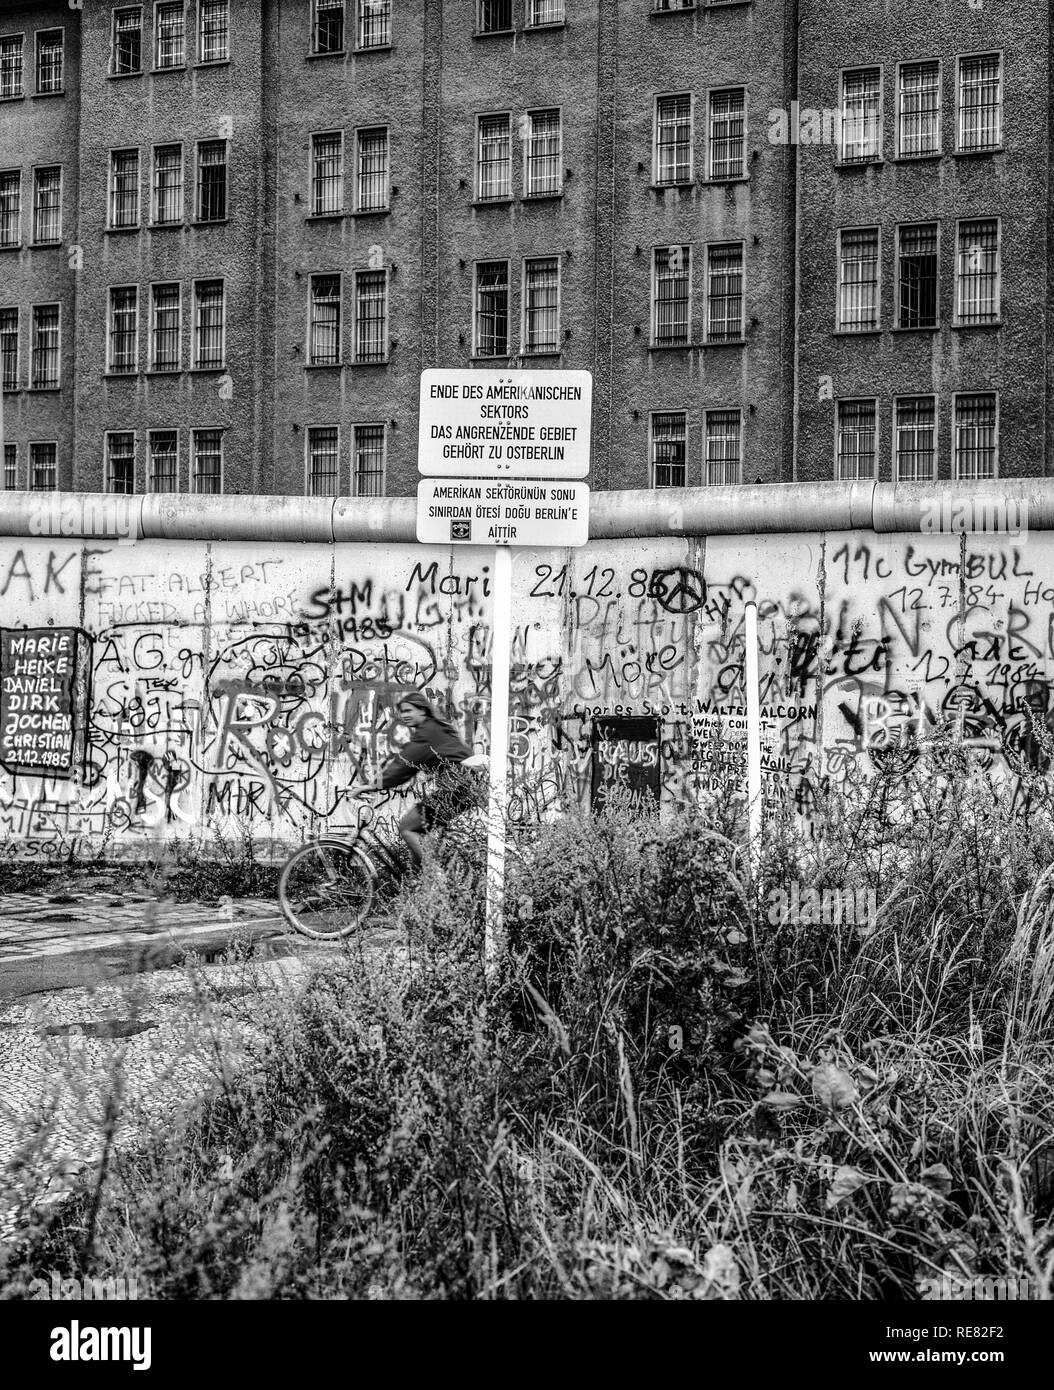 August 1986, Berlin Wall graffitis, warning sign for end of American sector, cyclist, East Berlin building, West Berlin side, Germany, Europe, Stock Photo